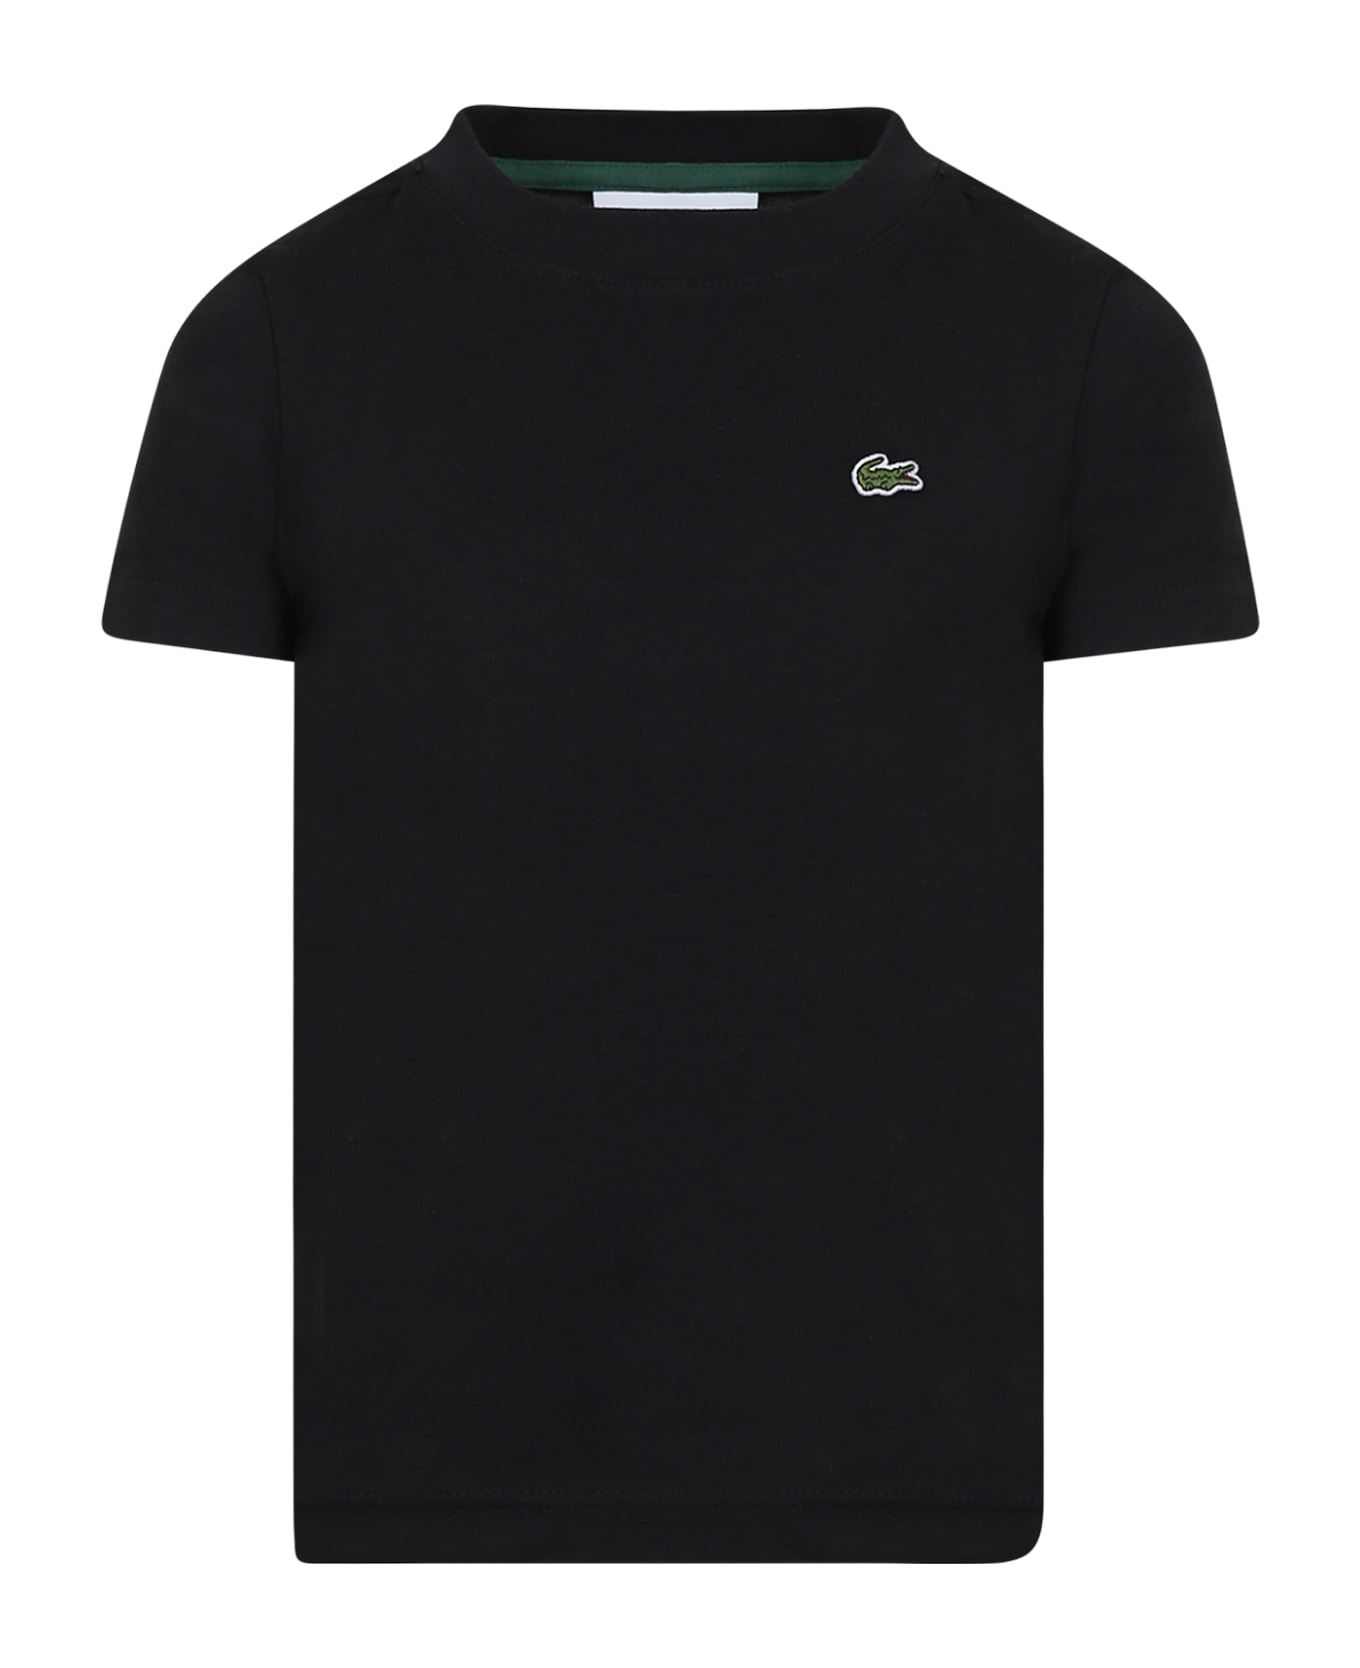 Lacoste Black T-shirt For Boy With Crocodile - Black